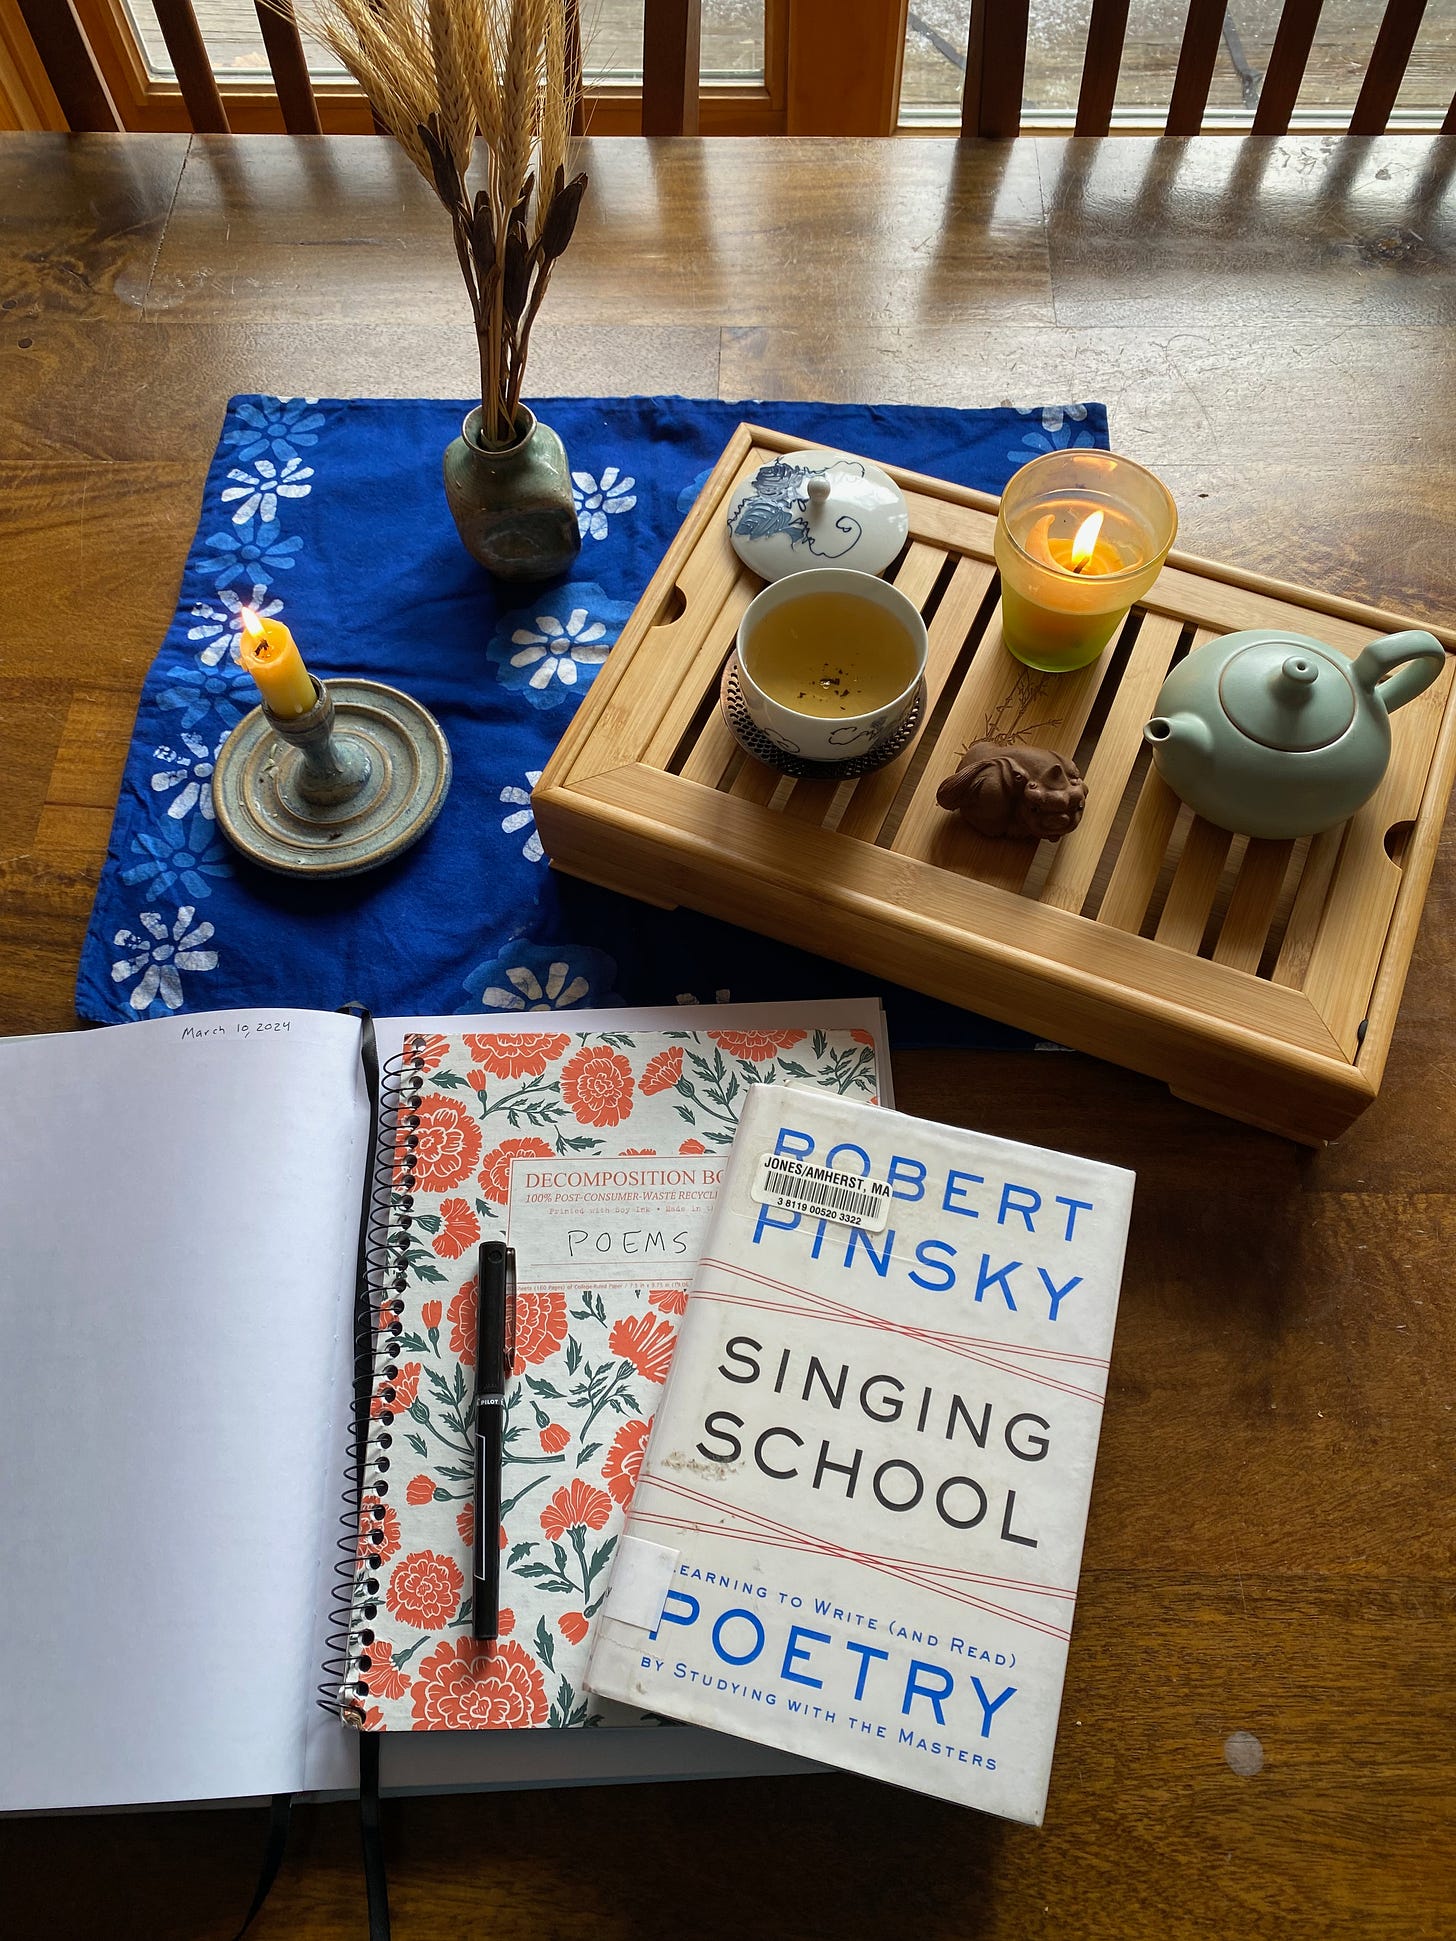 My poetry school setup: a stack of notebooks, Robert Pinsky’s Singing School, a blue cloth placemat with a candle and a vase of dried flowers, and a tea tray with teapot, cup, and tea animal.